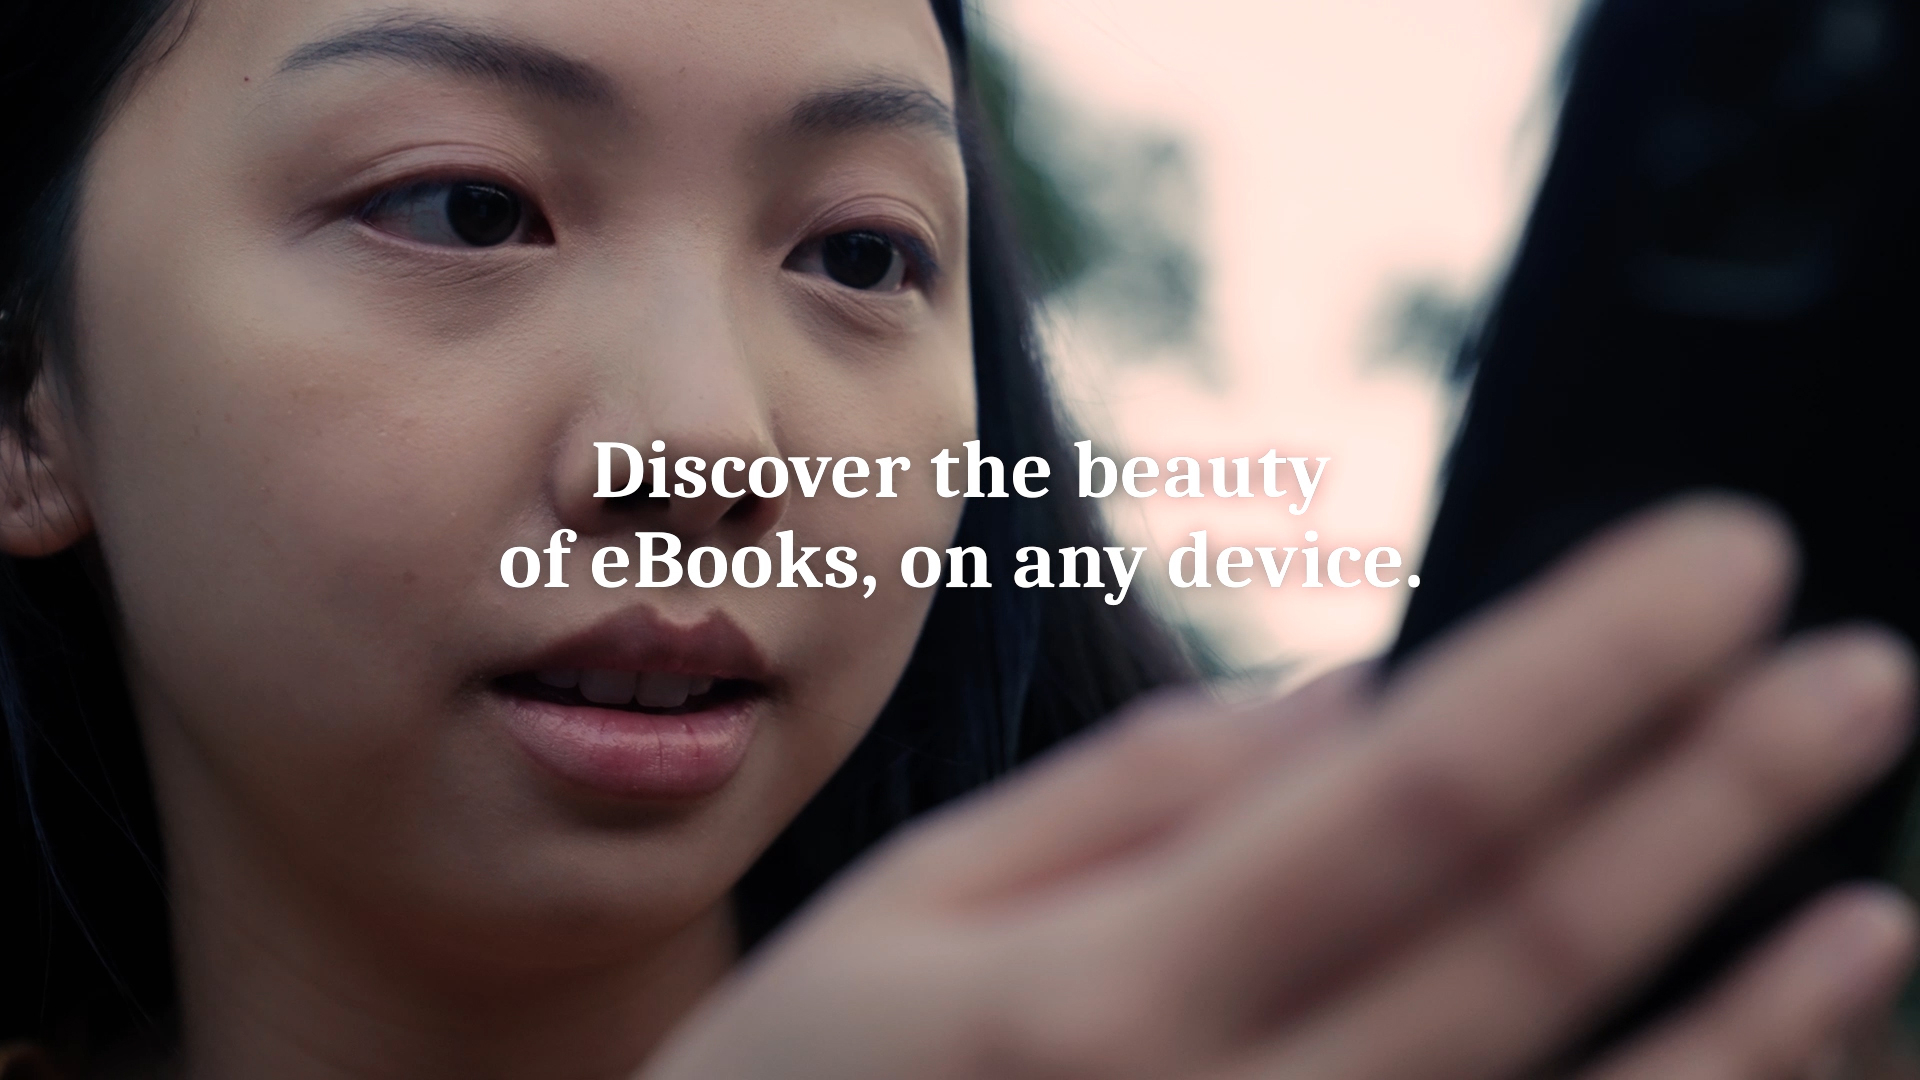 Discover the beauty of eBooks on any internet-enabled device.